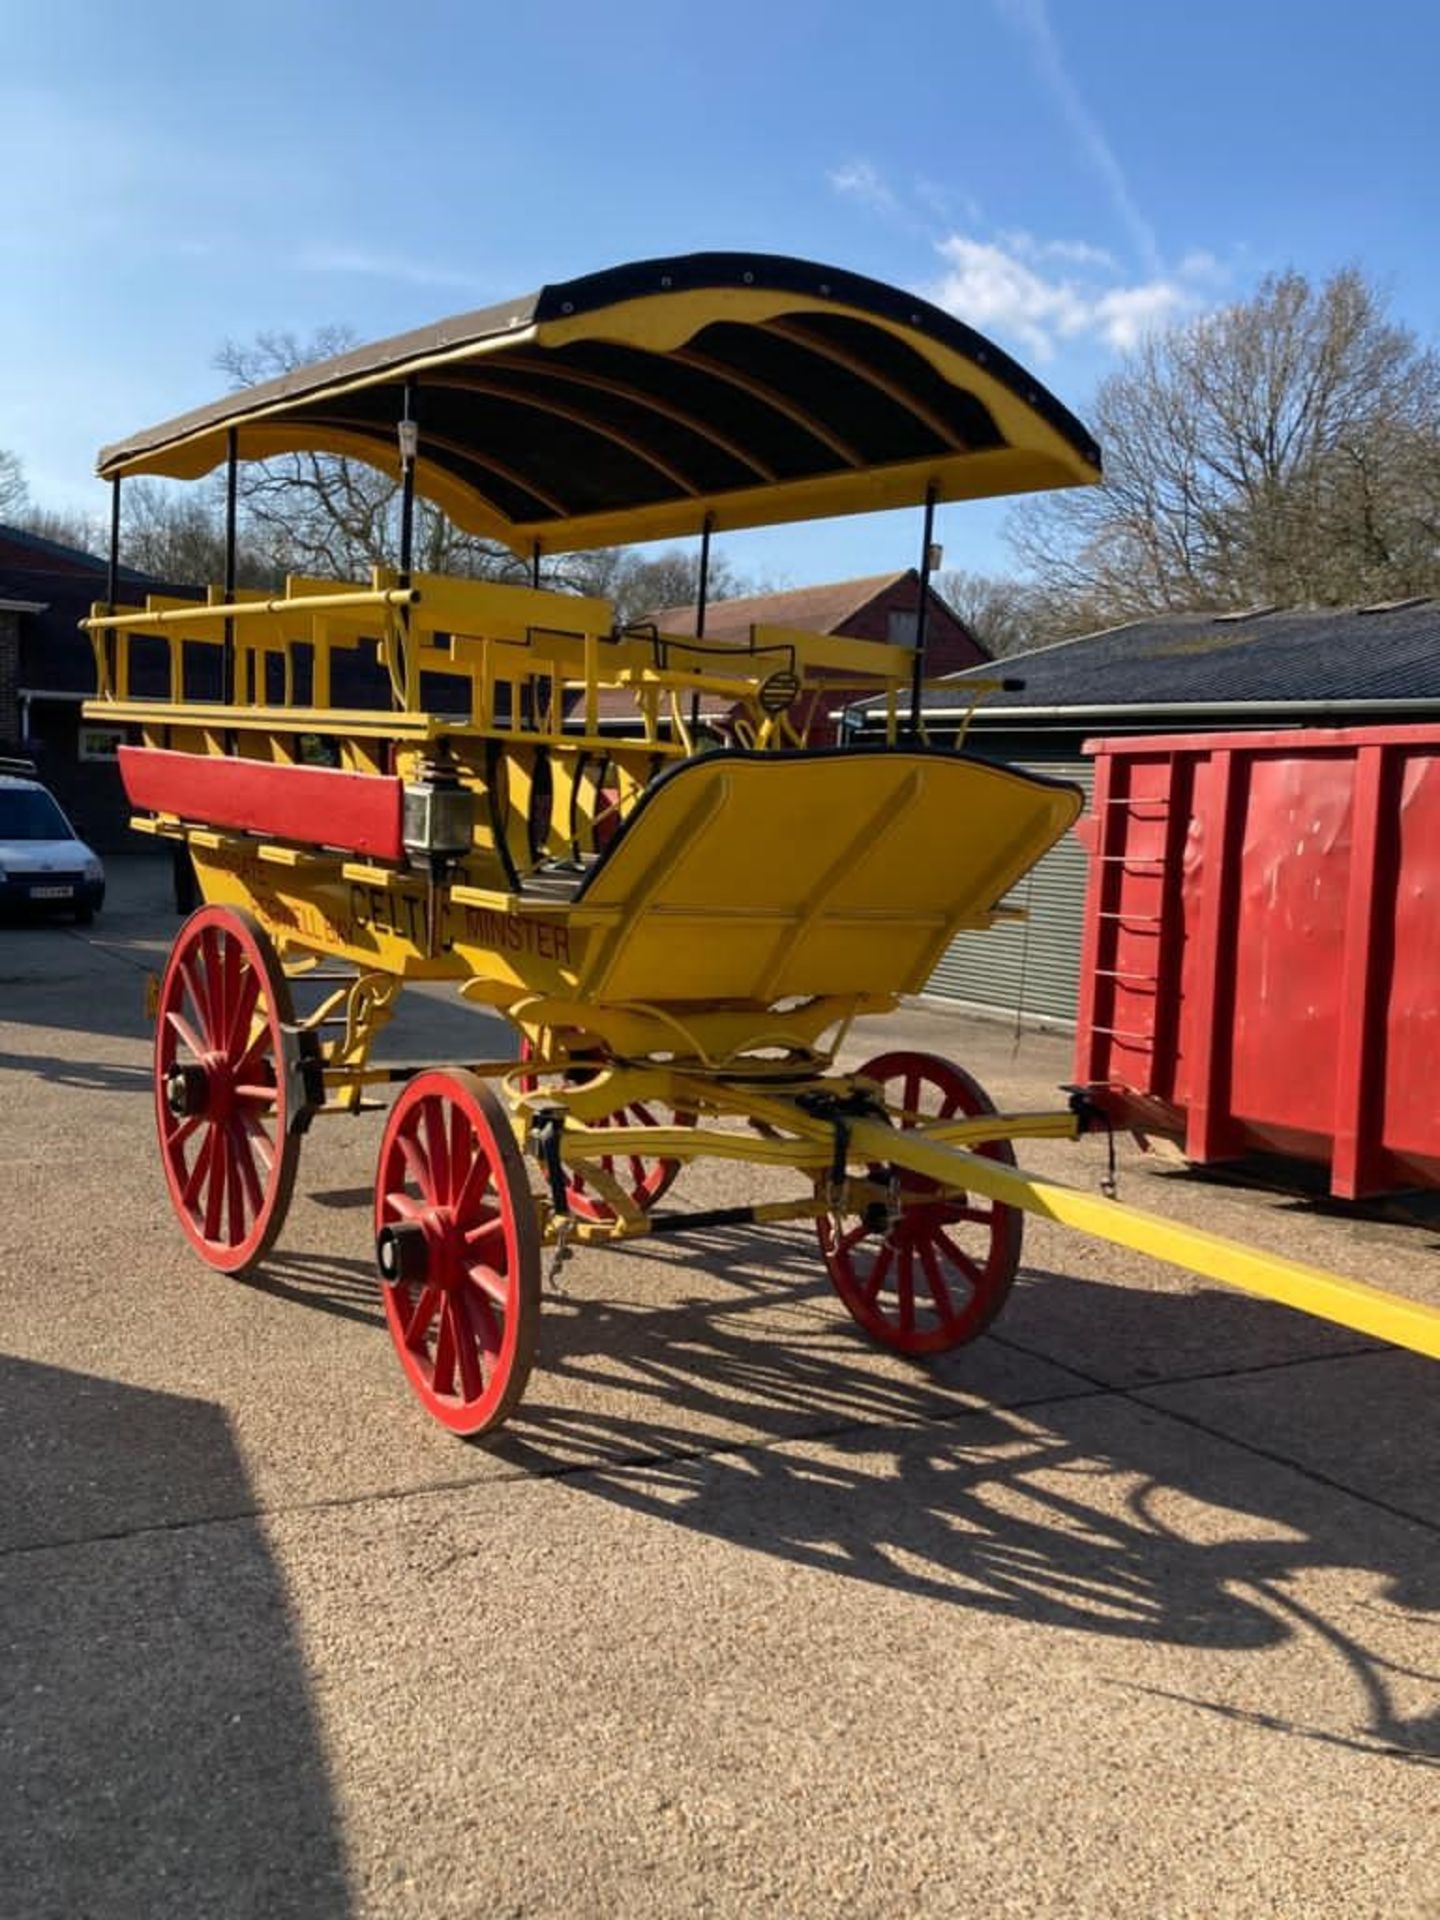 CHARABANC painted yellow and red with 21 wooden seats accessible via a rear staircase - Image 2 of 5